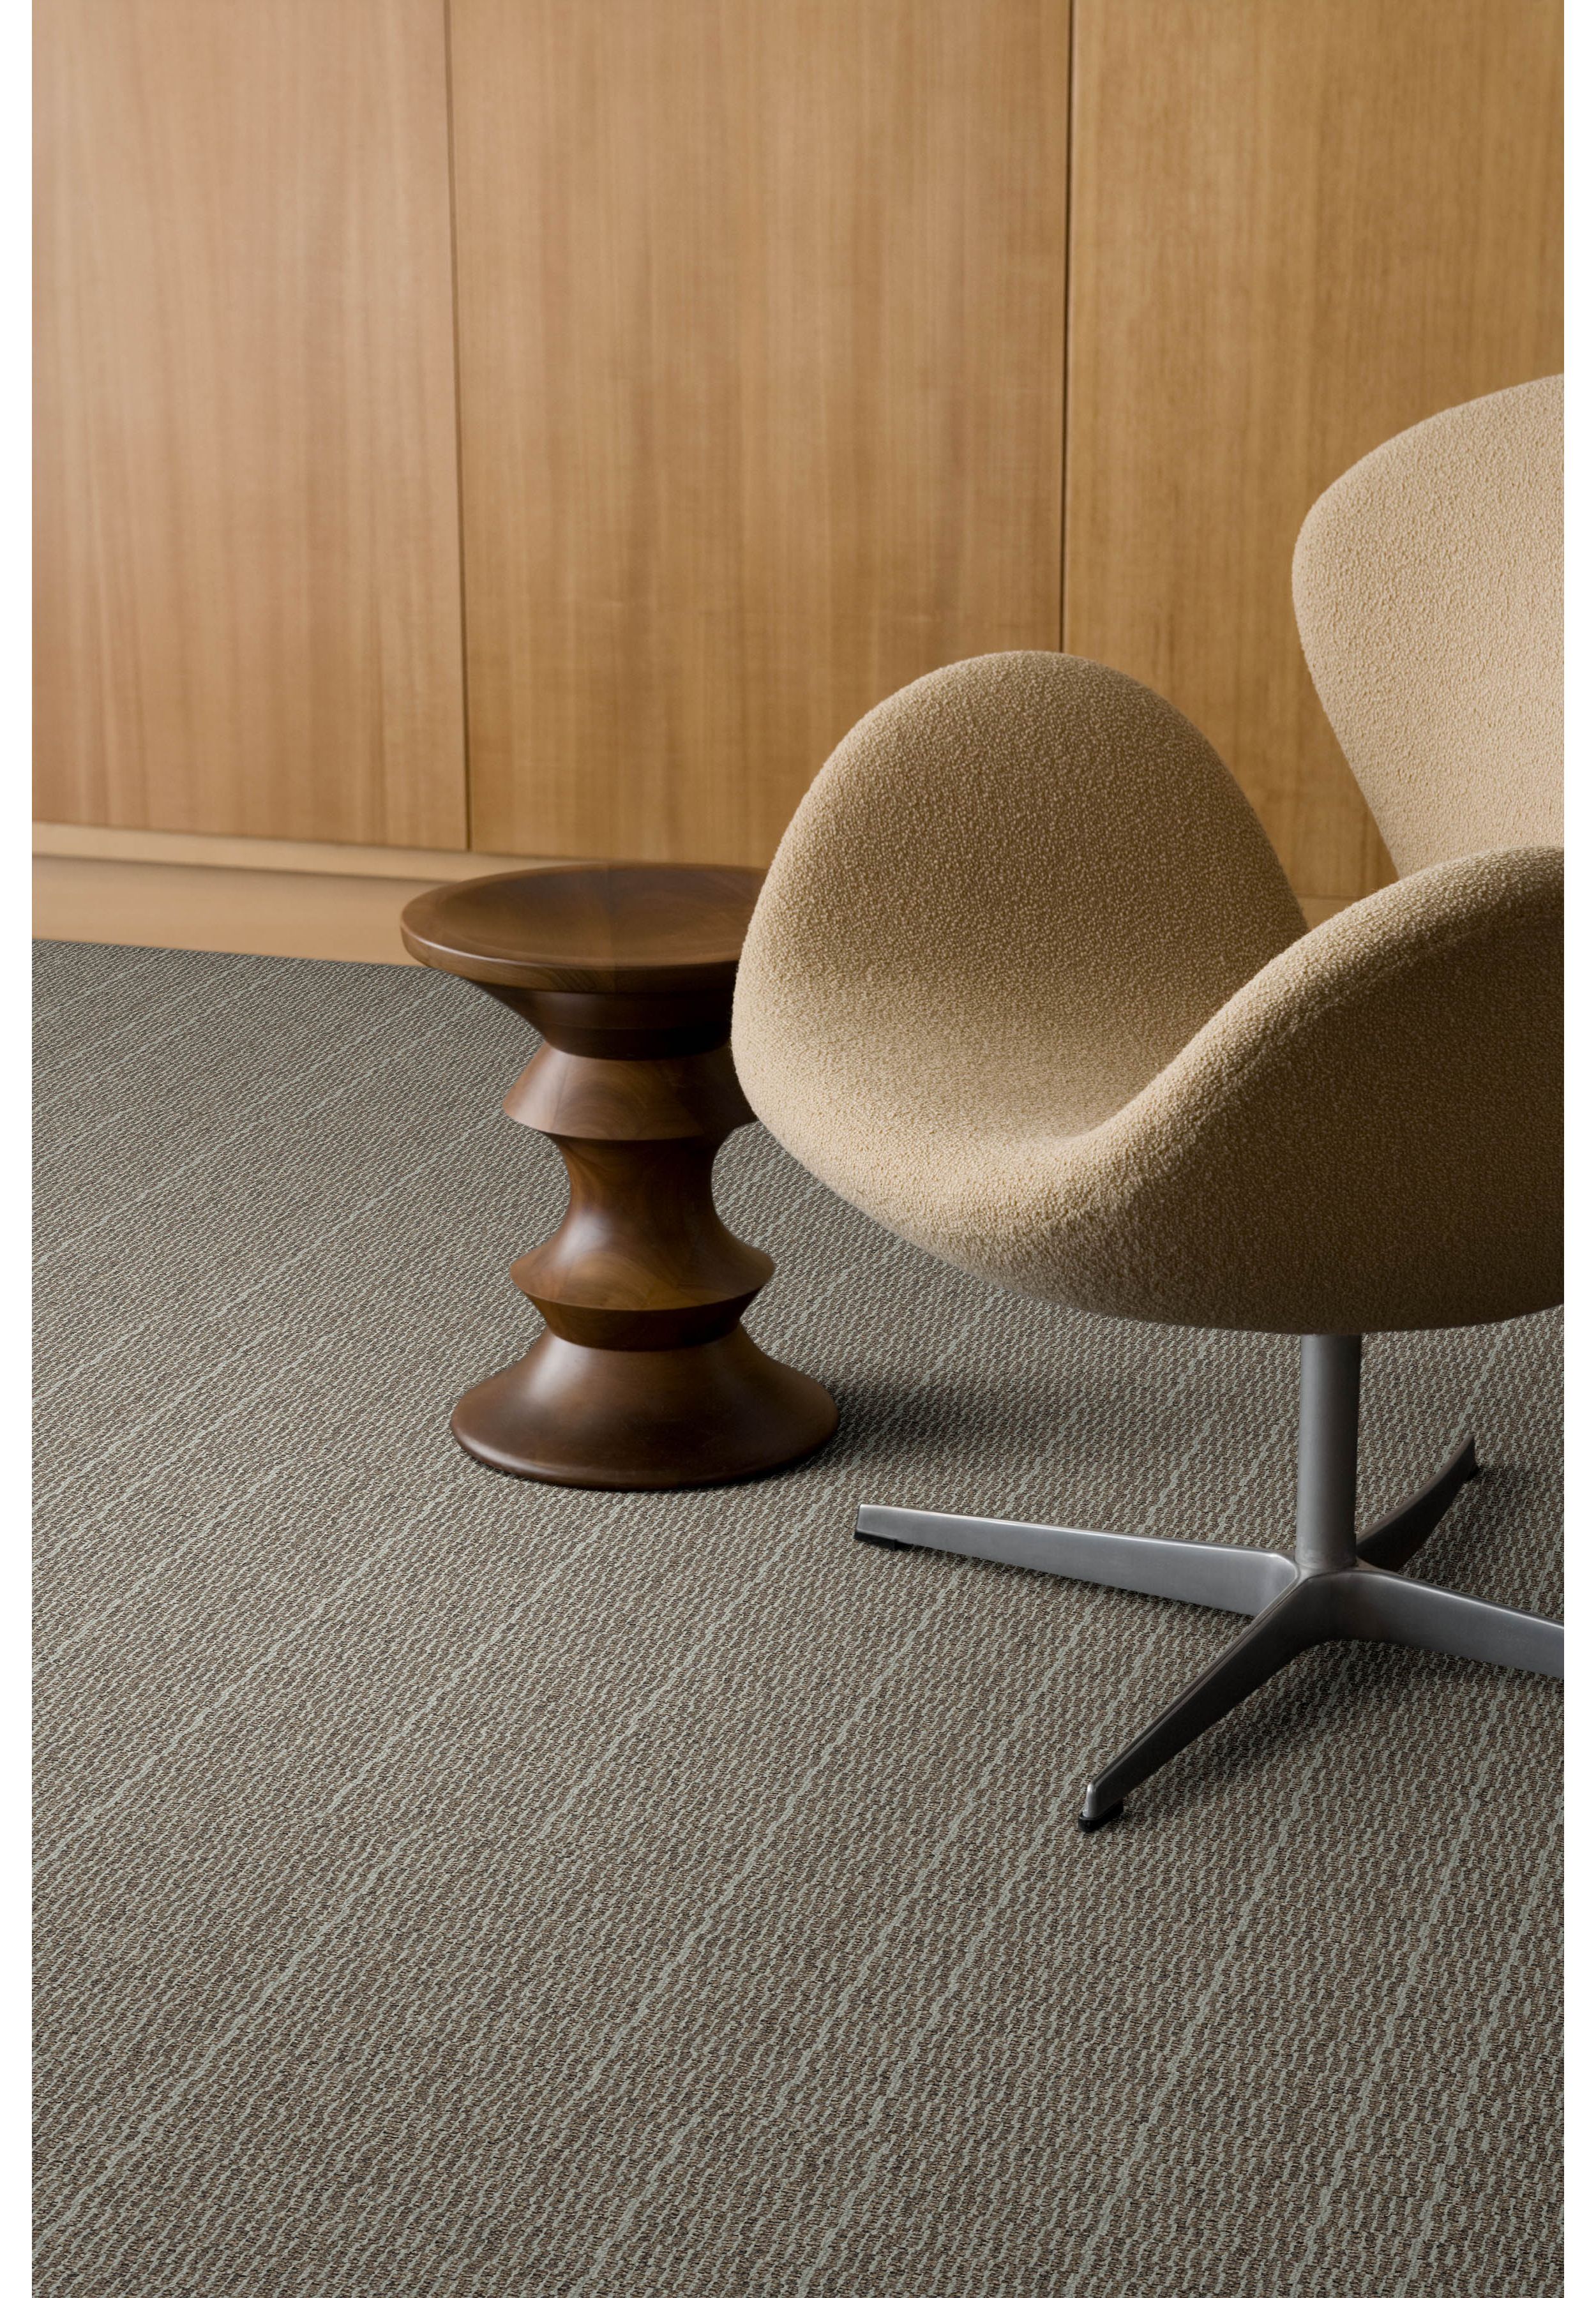 Detail of Interface Tangled & Taut carpet tile with chair and Eames stool imagen número 5